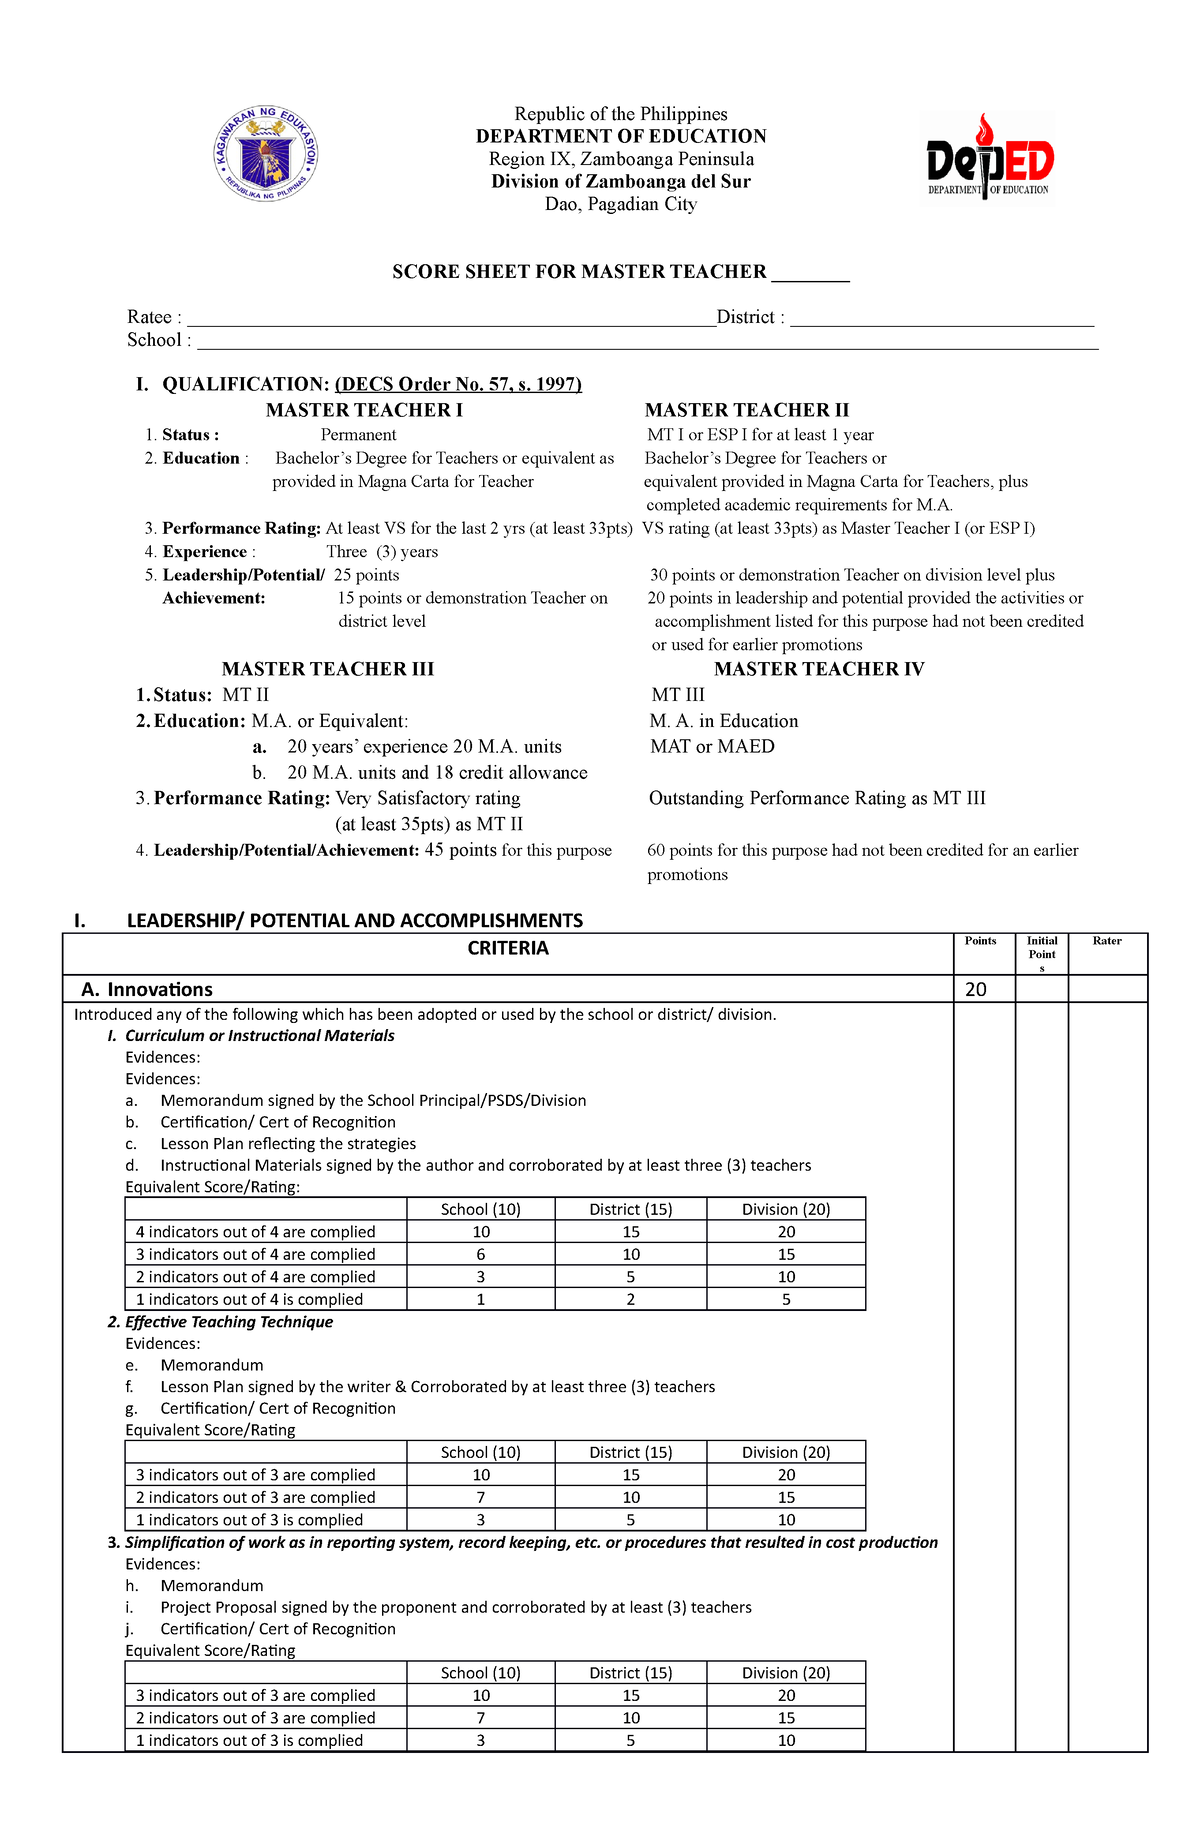 MT Score Sheets 2021 1 Republic Of The Philippines DEPARTMENT OF 